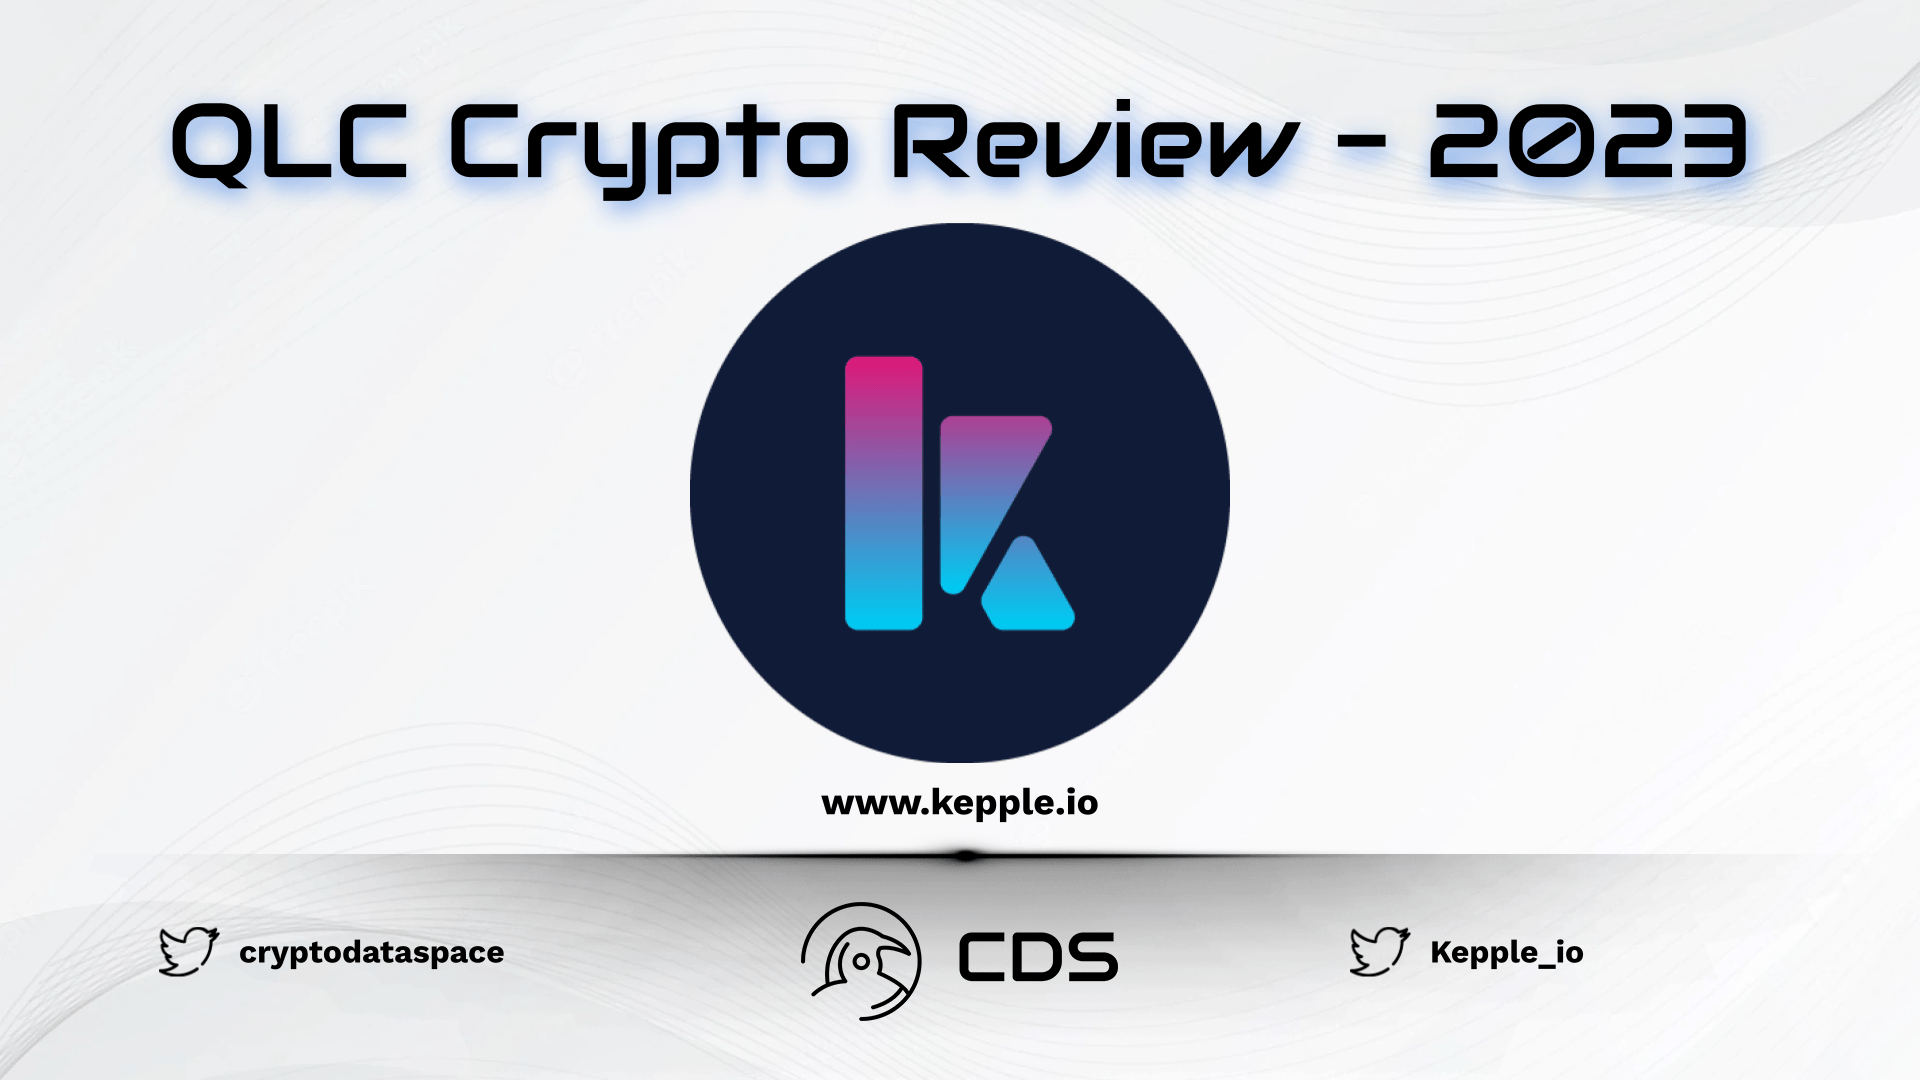 QLC Crypto Review - 2023